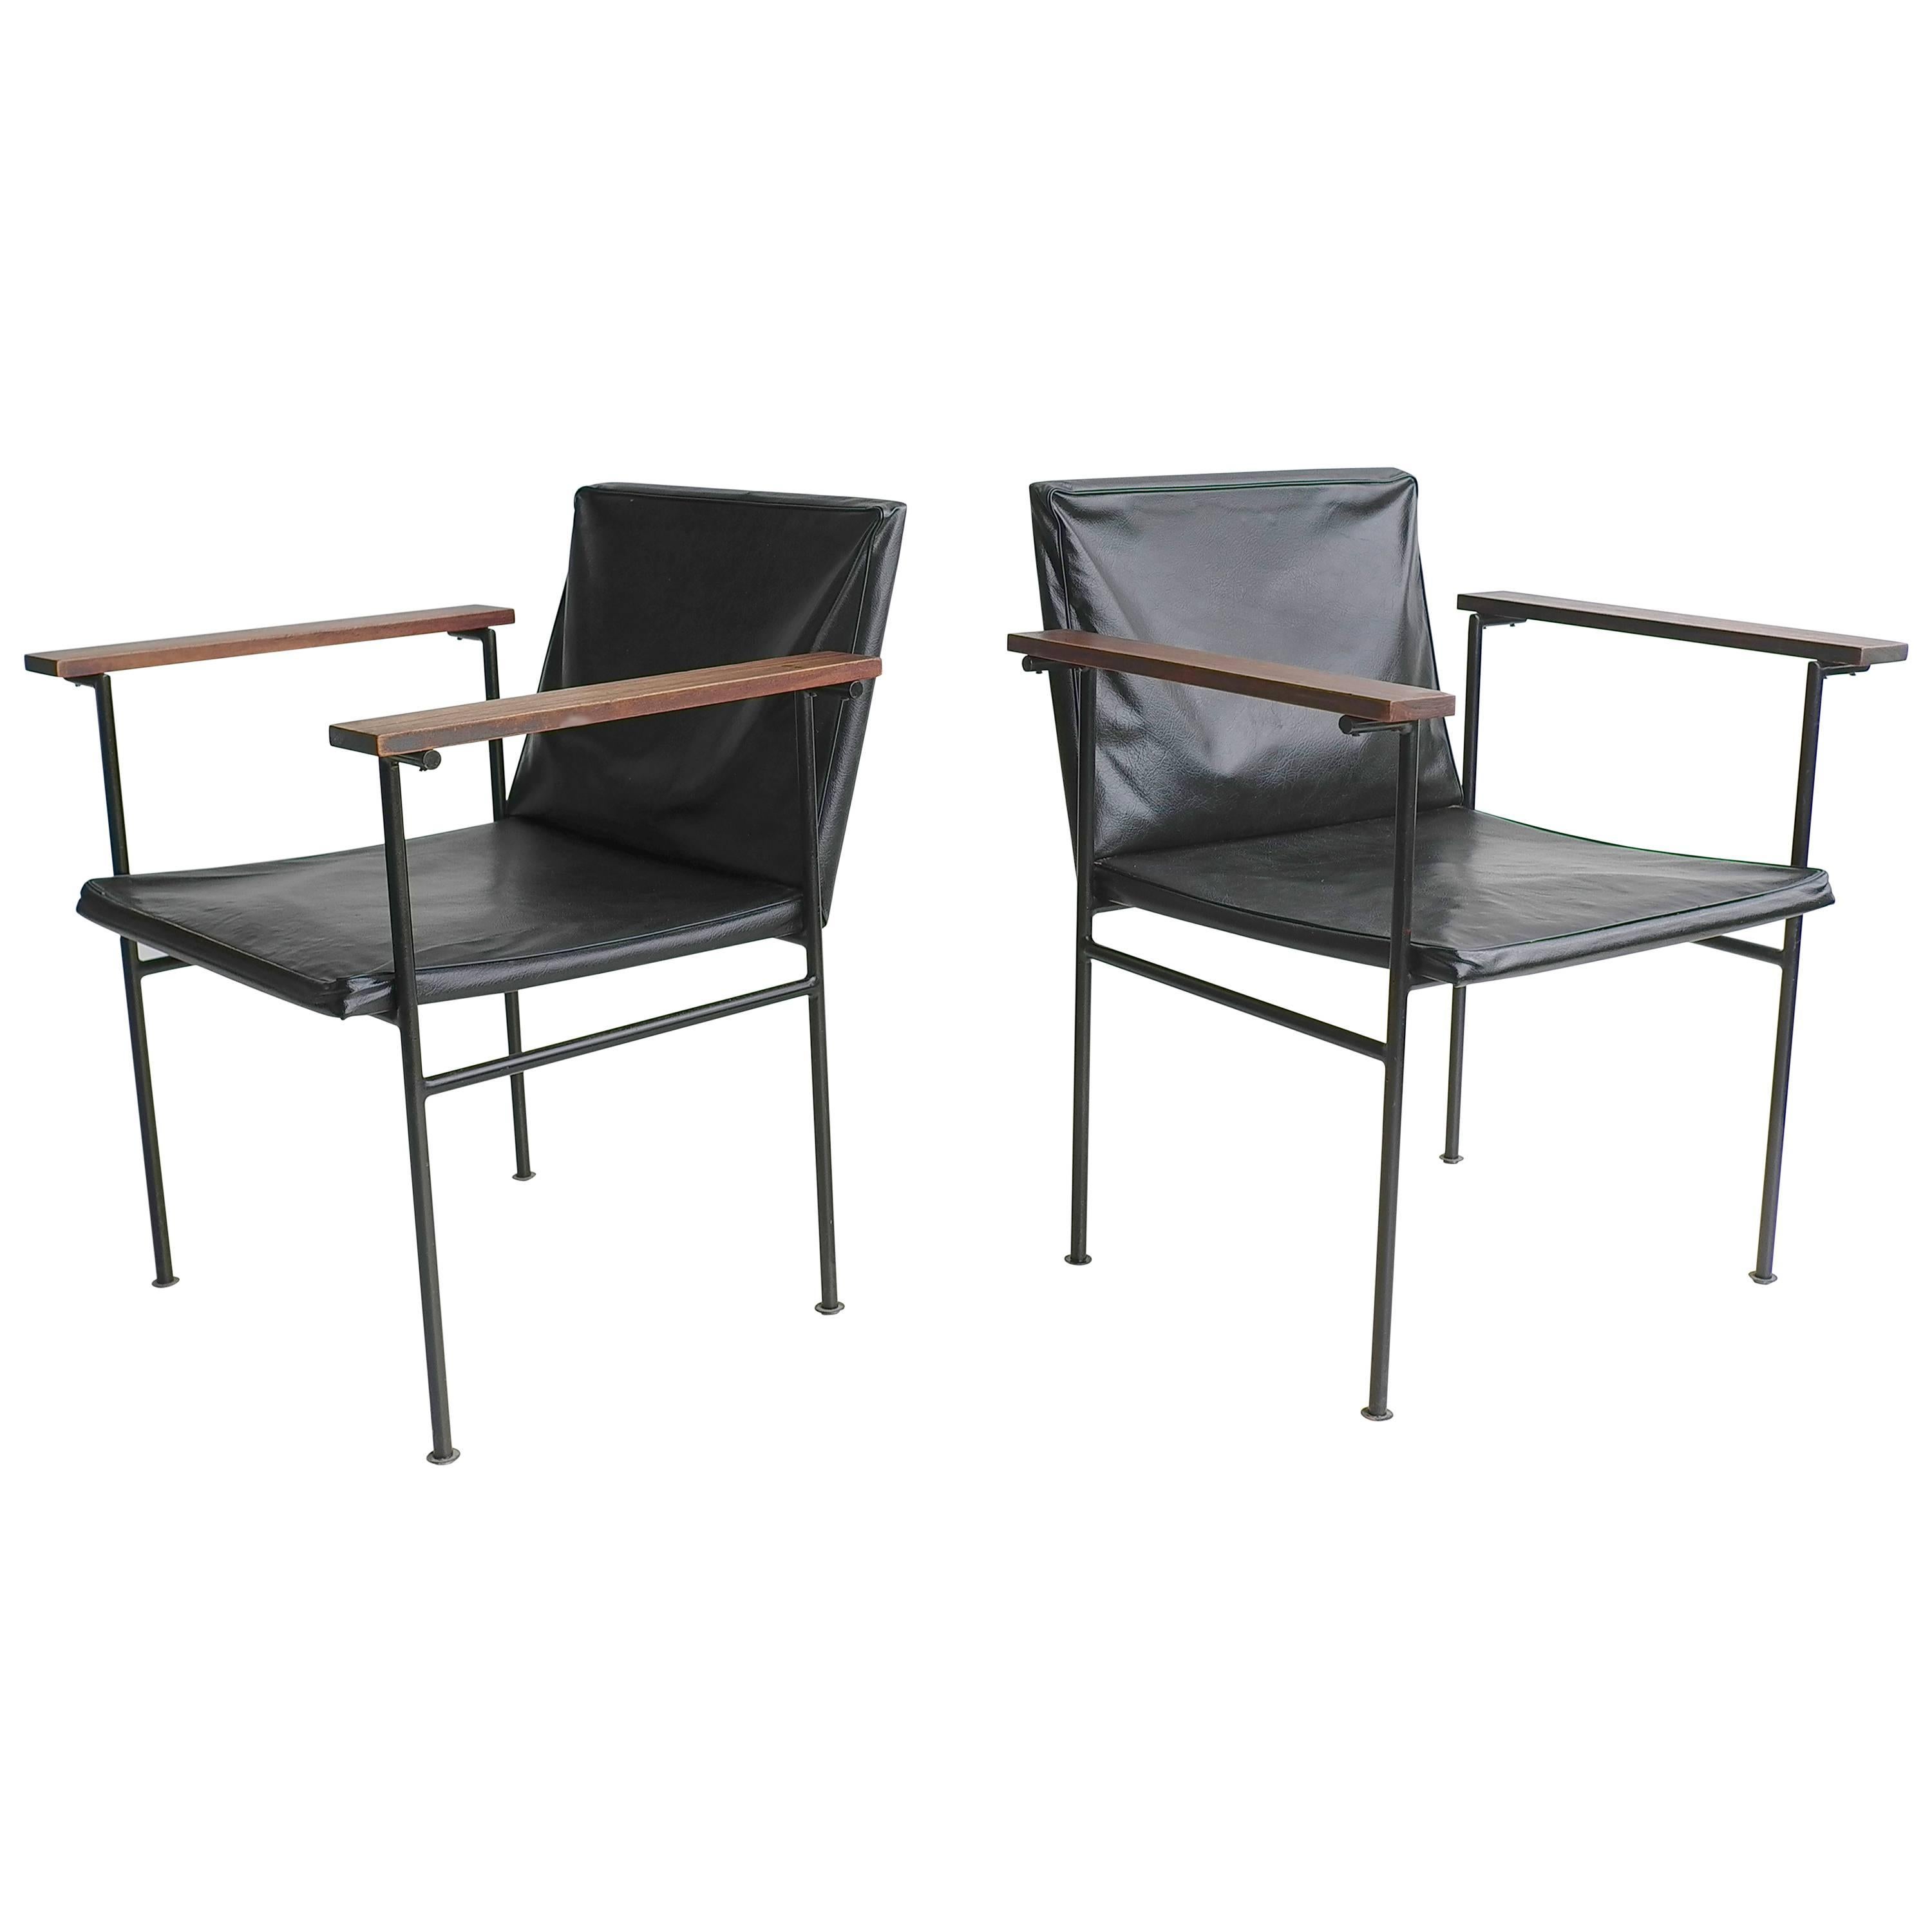 Pair of Minimal Designed Side Chairs, France, 1950s